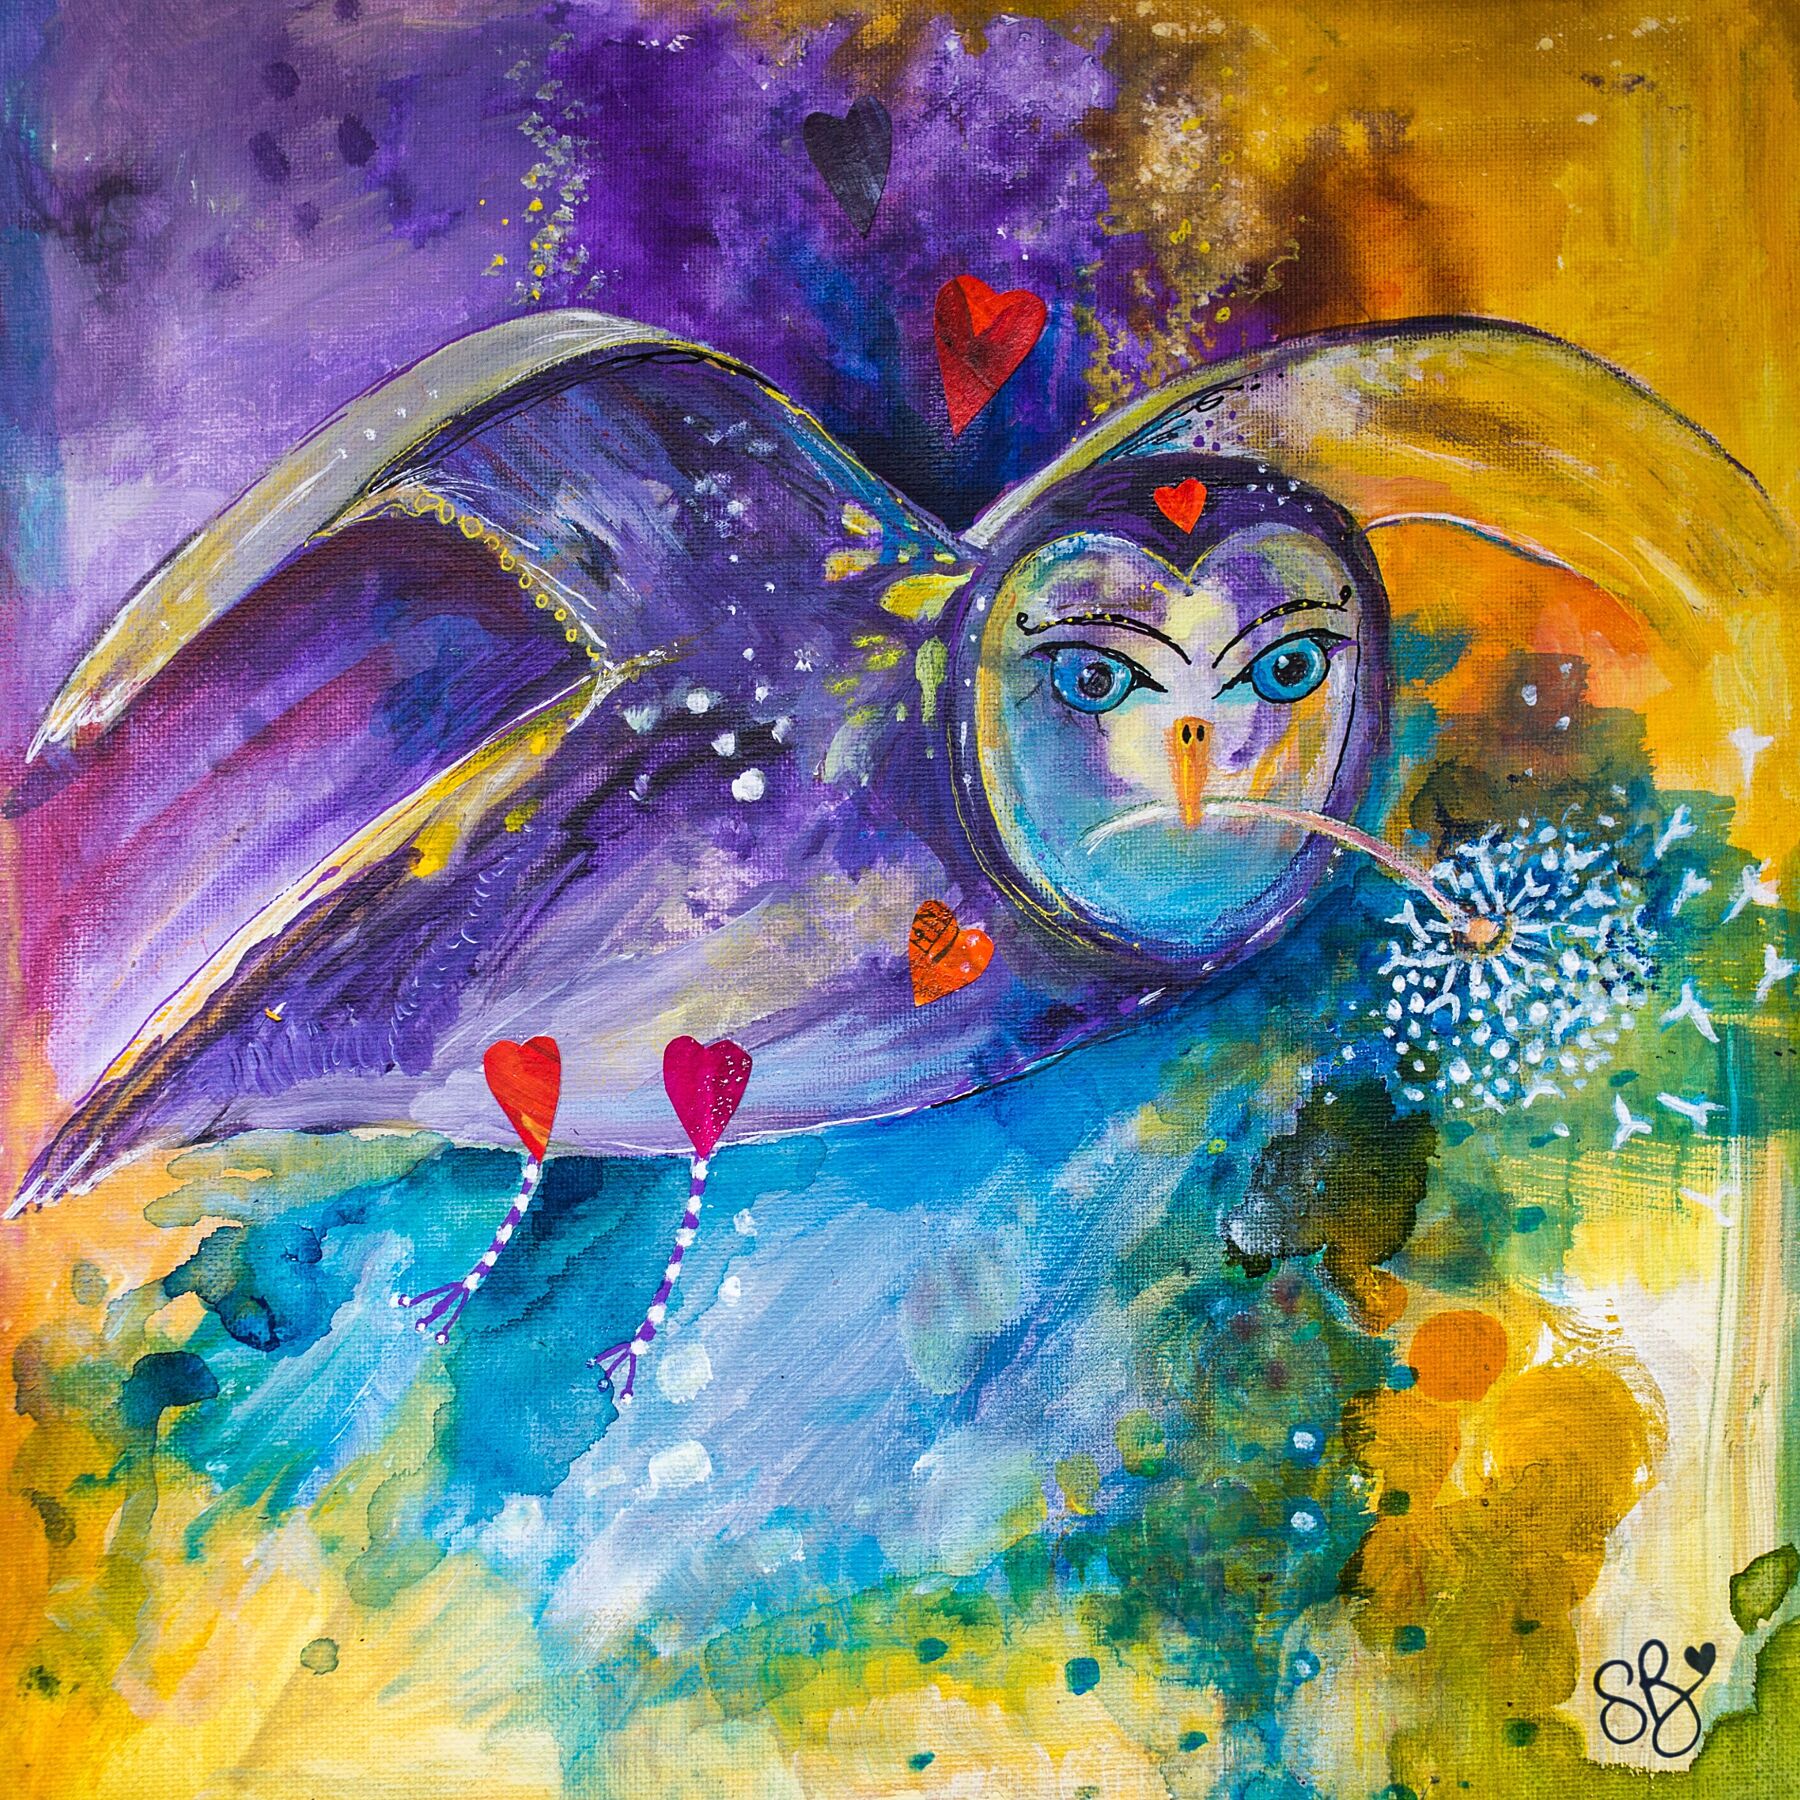 Owl Wisdom Limited Edition Owl Print - Air Spirit Owl is painted using soft tones of purple, yellow , grey and sky blue. She holds a dandelion gone to seed in her beak.